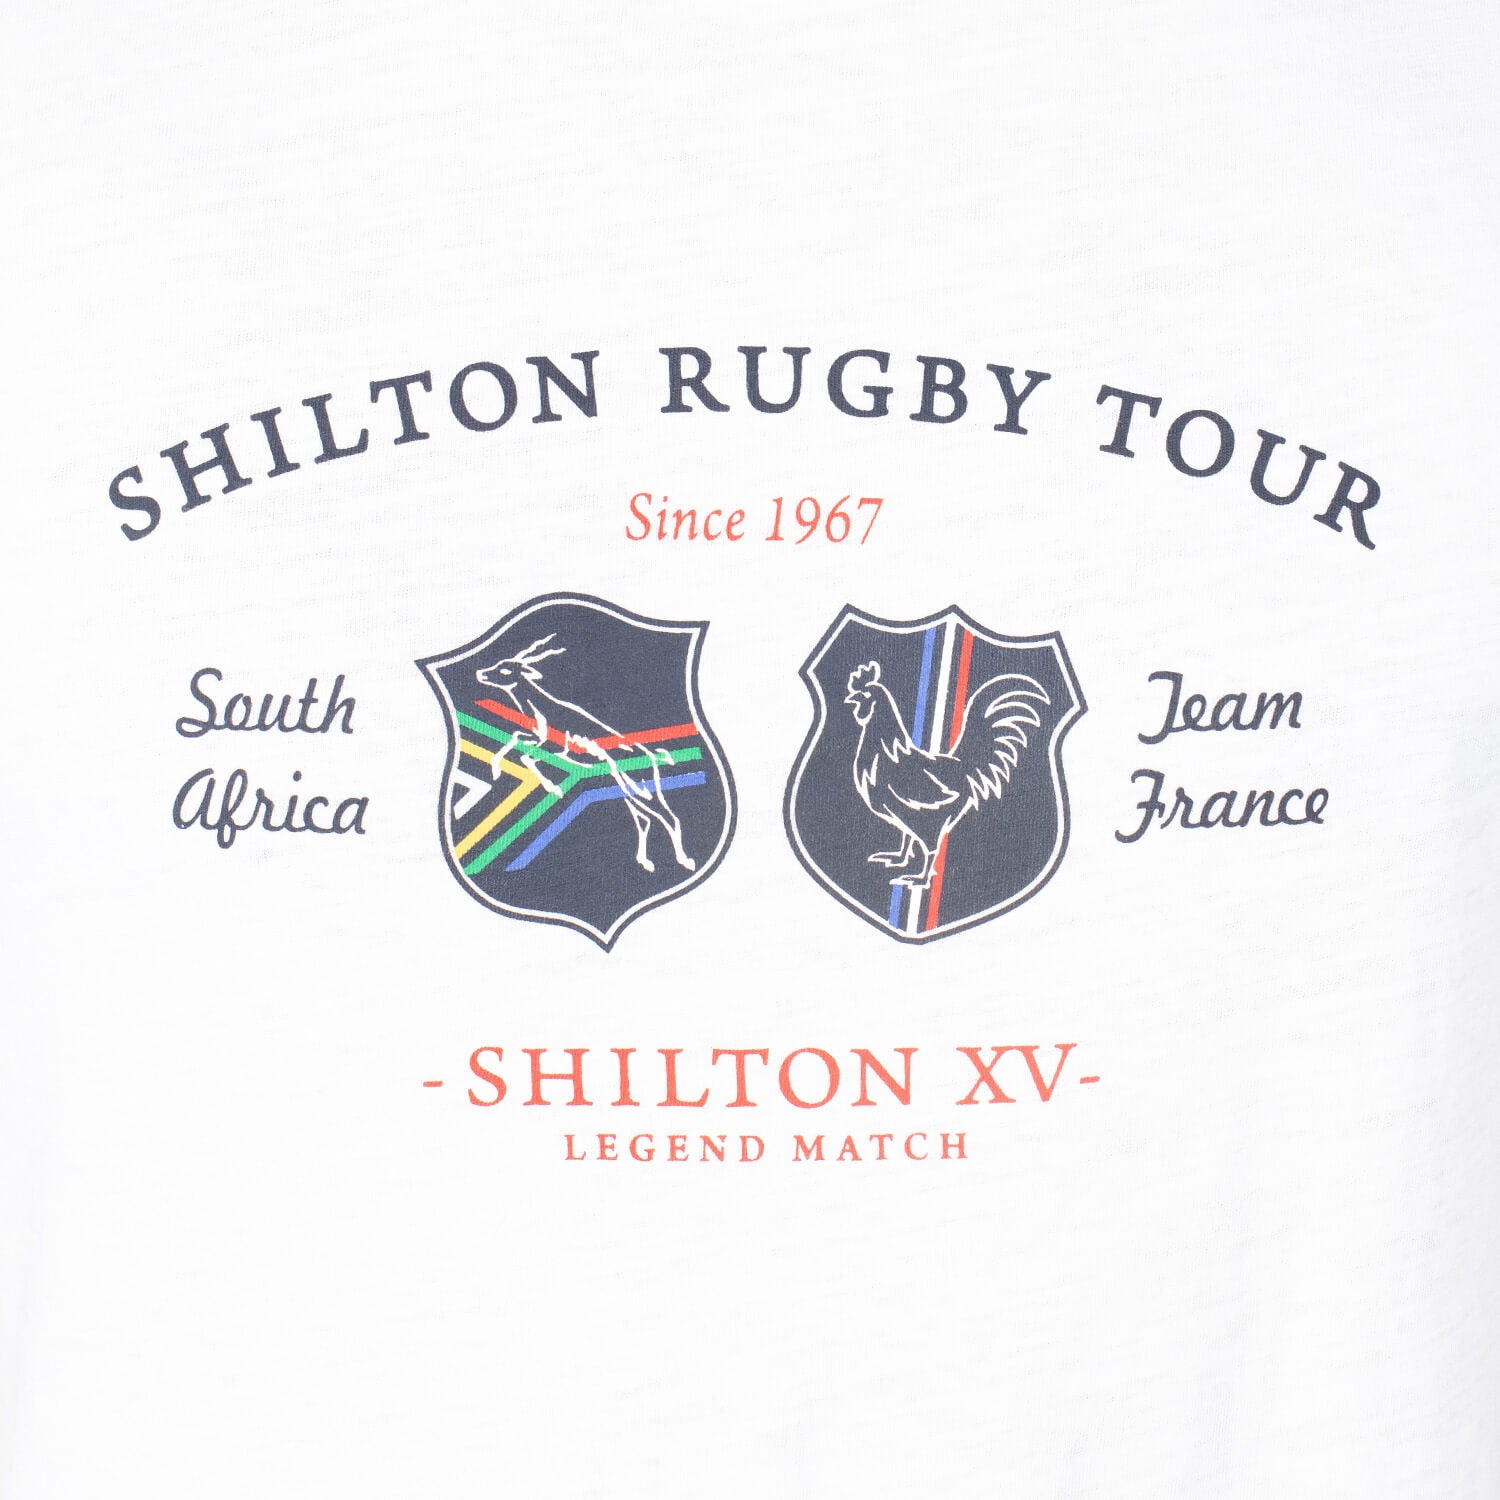 T-shirt rugby tour